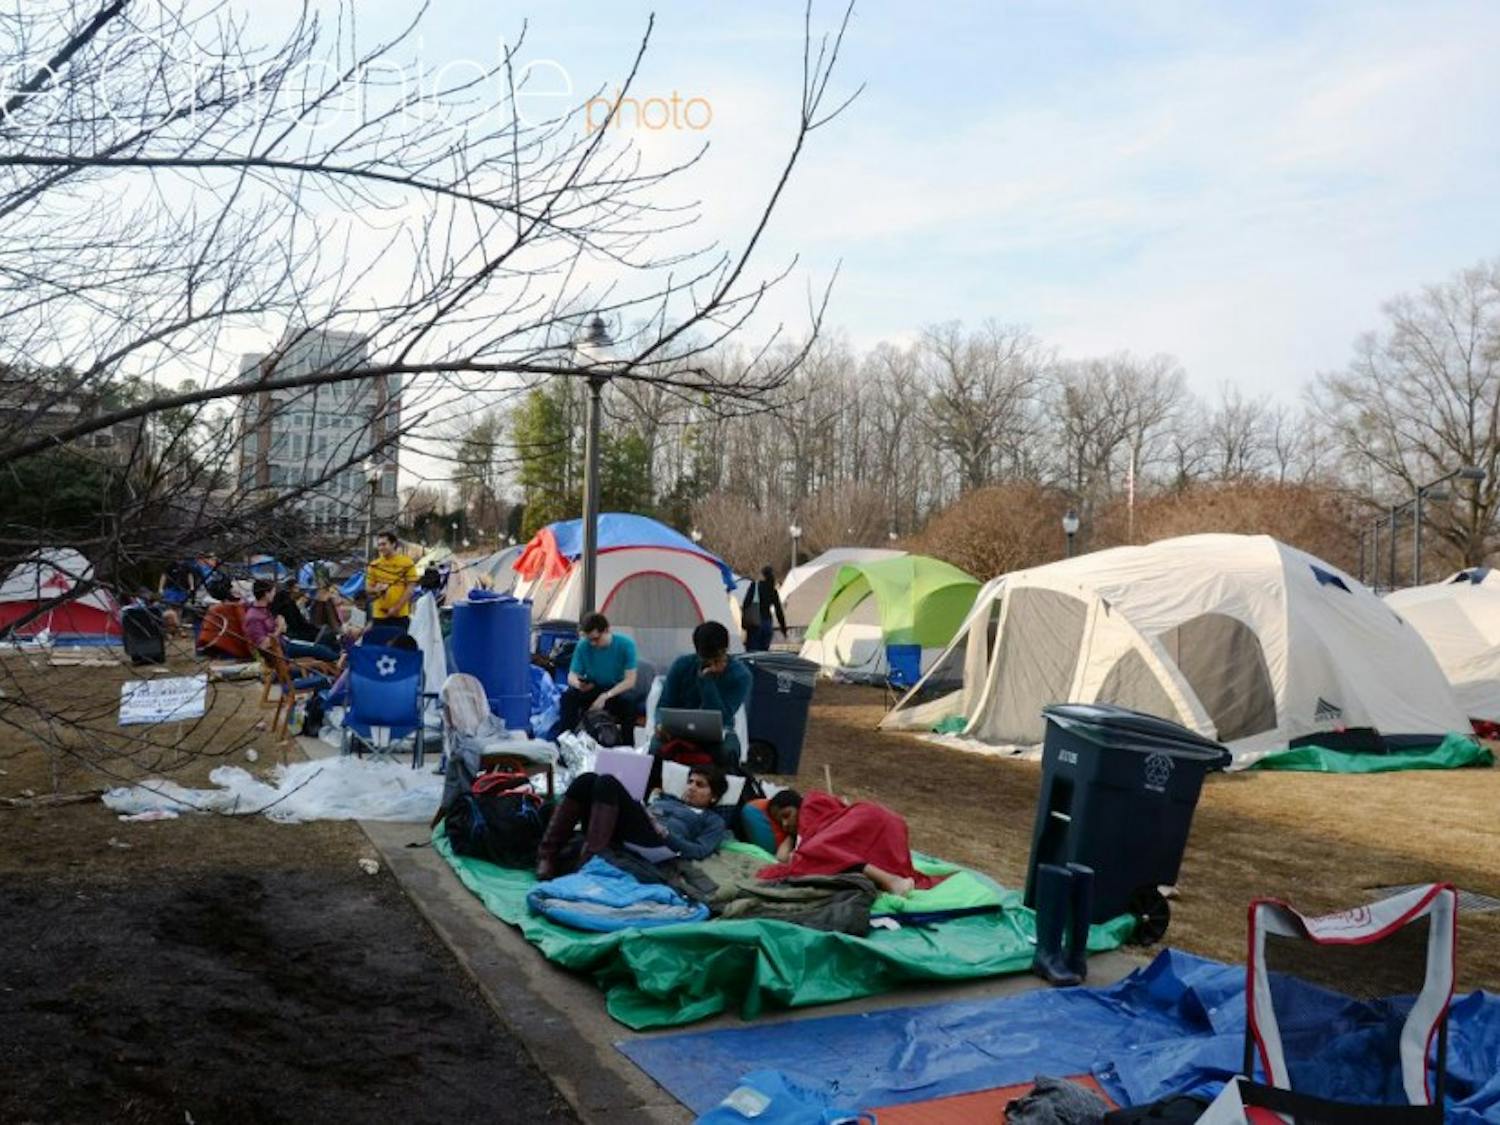 The number of total tents is still expected to be capped at 100 at this time to allow for students to get in to the North Carolina game via the walk-up line.&nbsp;